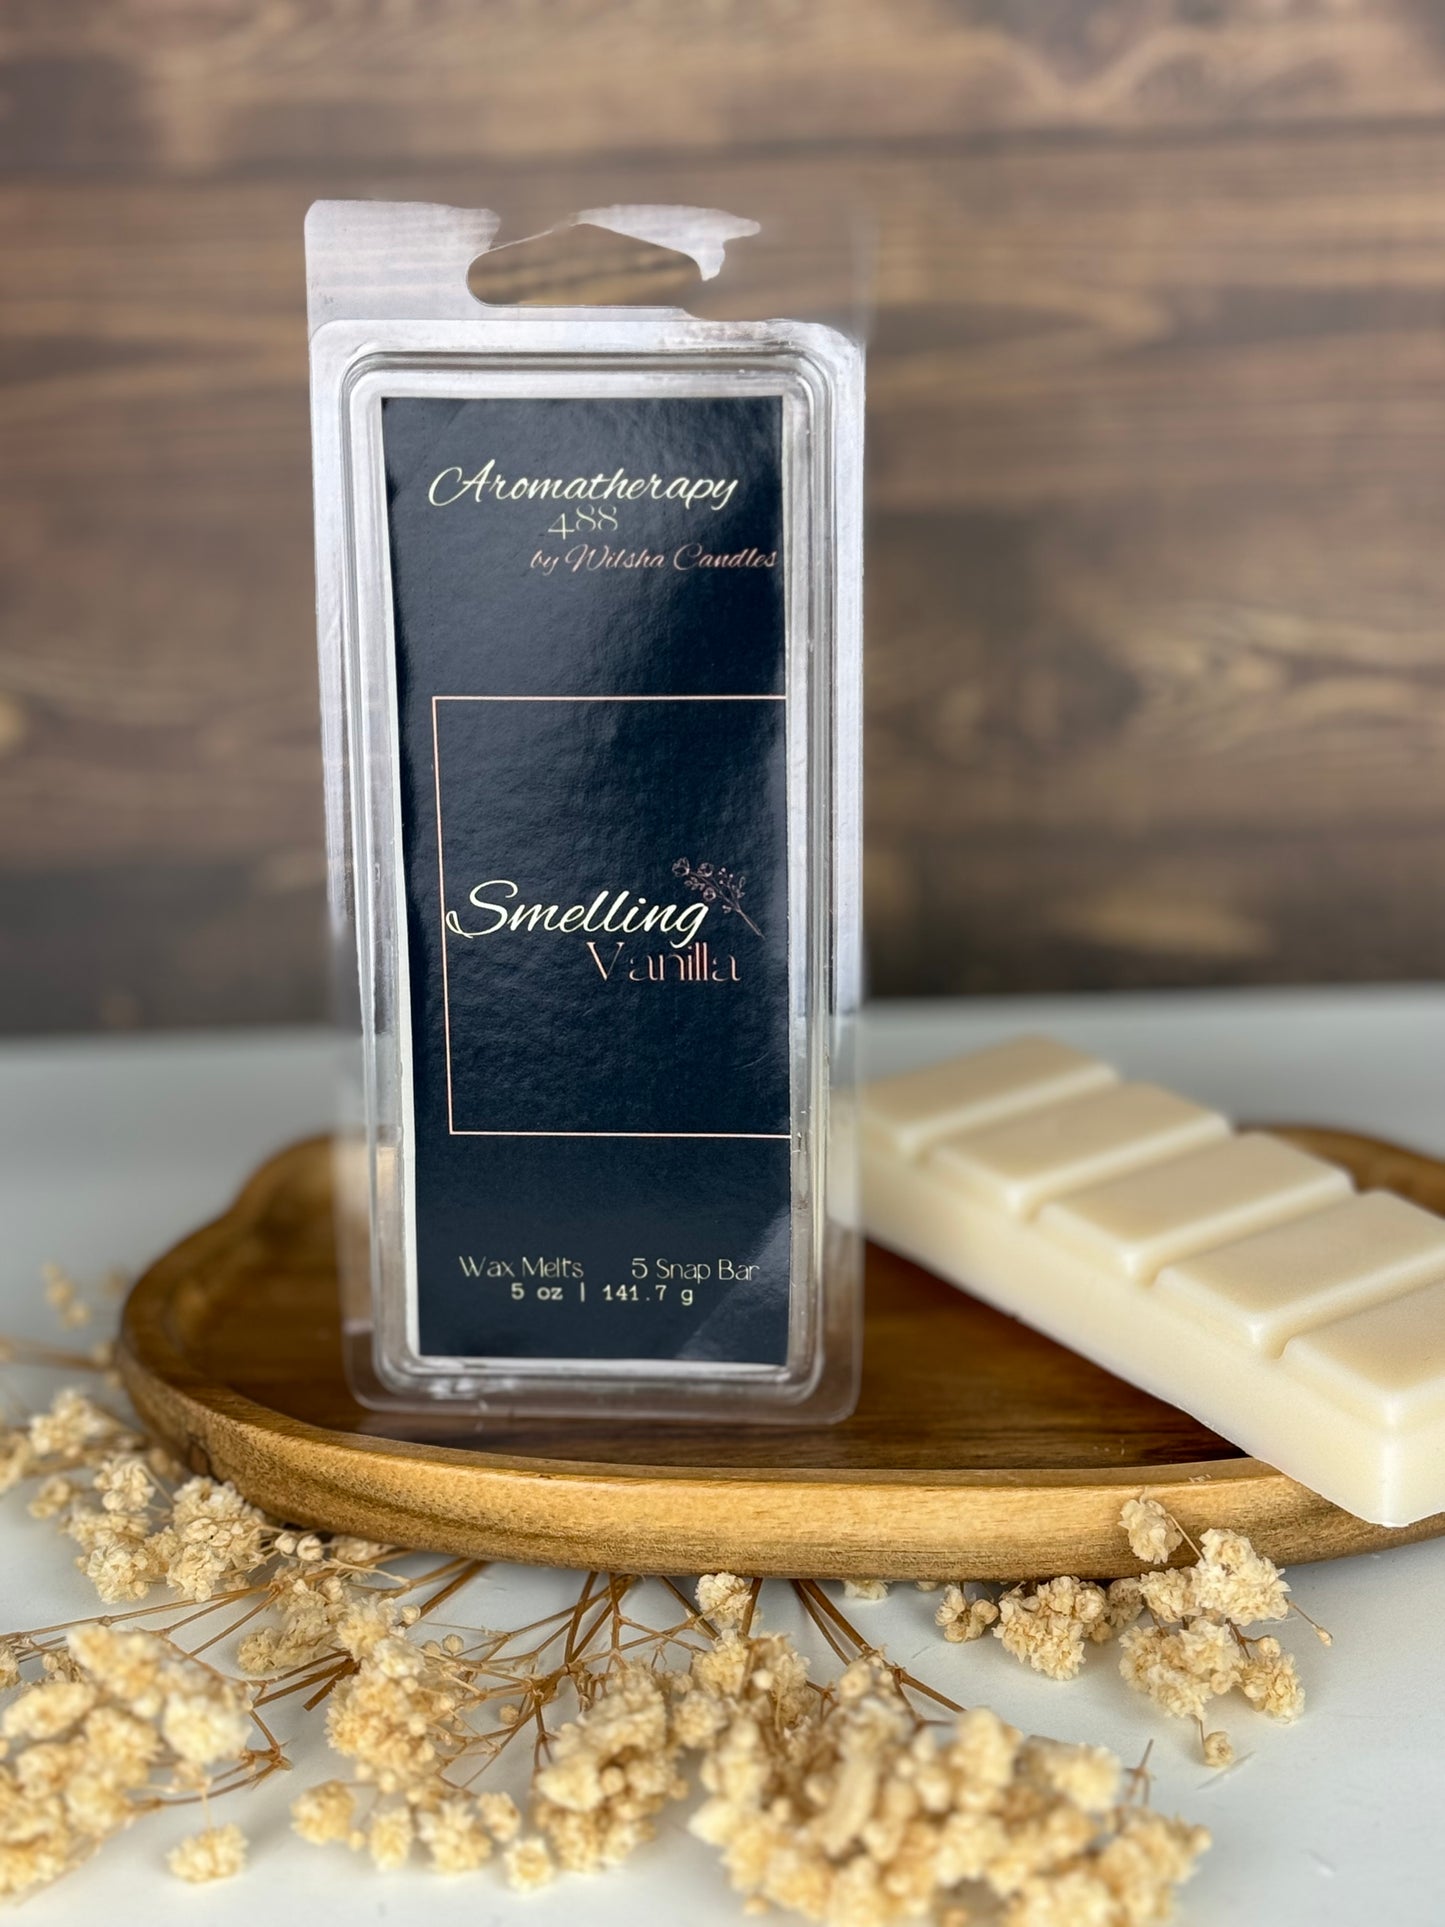 2 oz Snap Bar Wax Melts | Handcrafted | Travel Safe | Hand Poured Natural Pillar Soy Wax | High Quality Eco-Friendly | Luxury | Aromatherapy Wax Melts for Relaxation